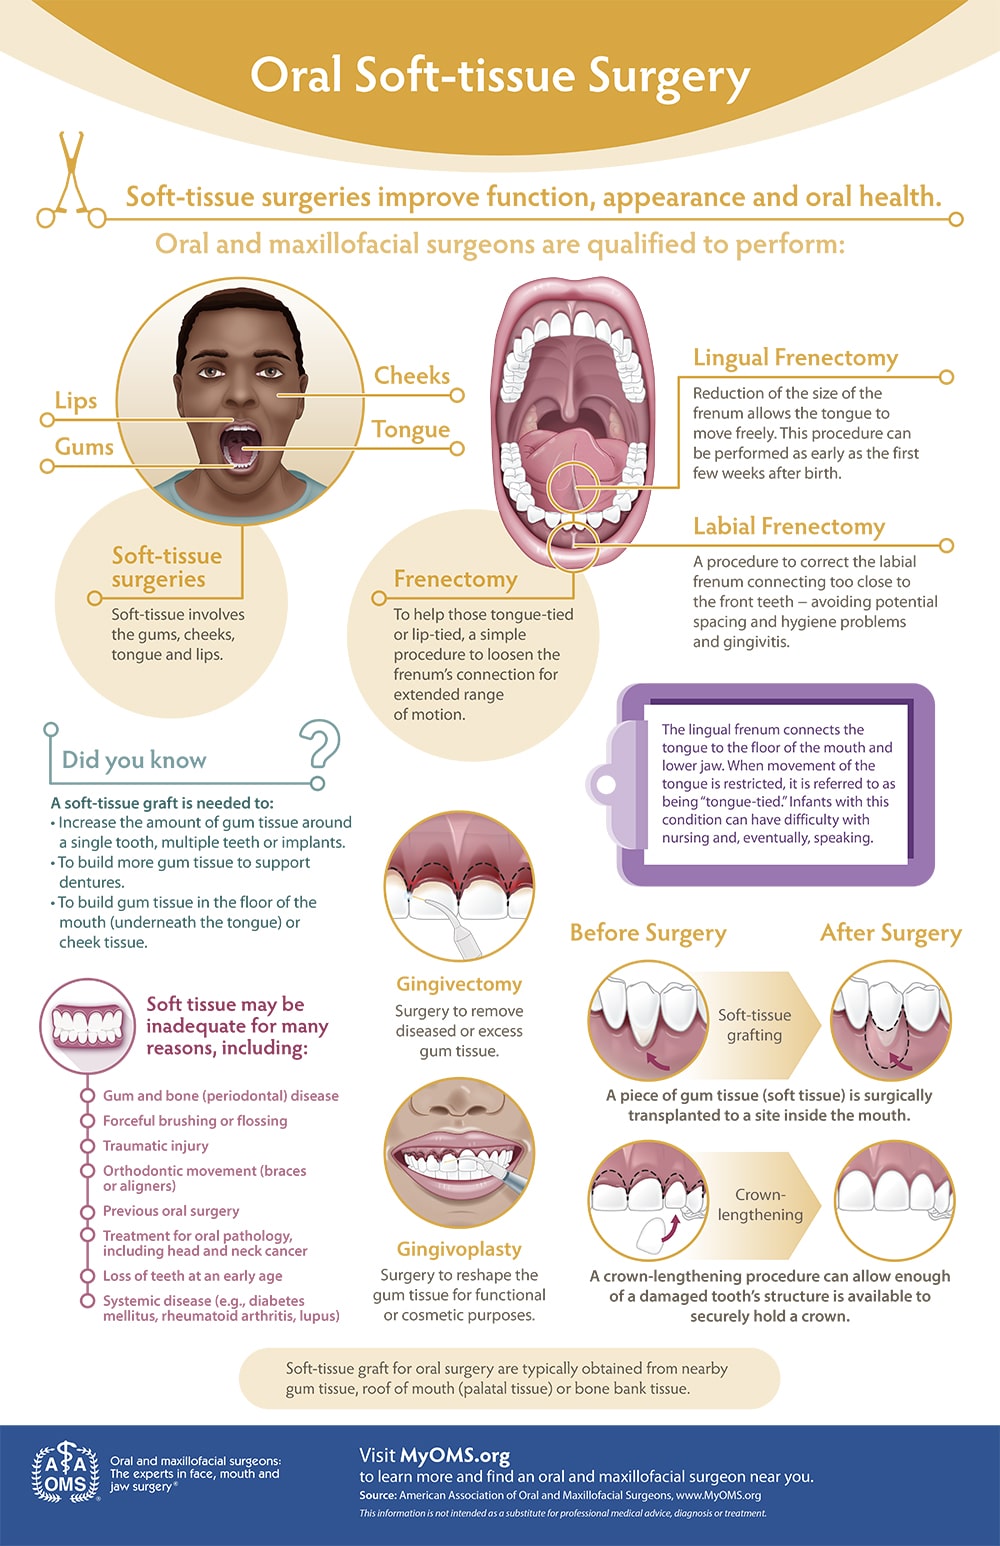 Oral Soft-tissue Surgery Infographic